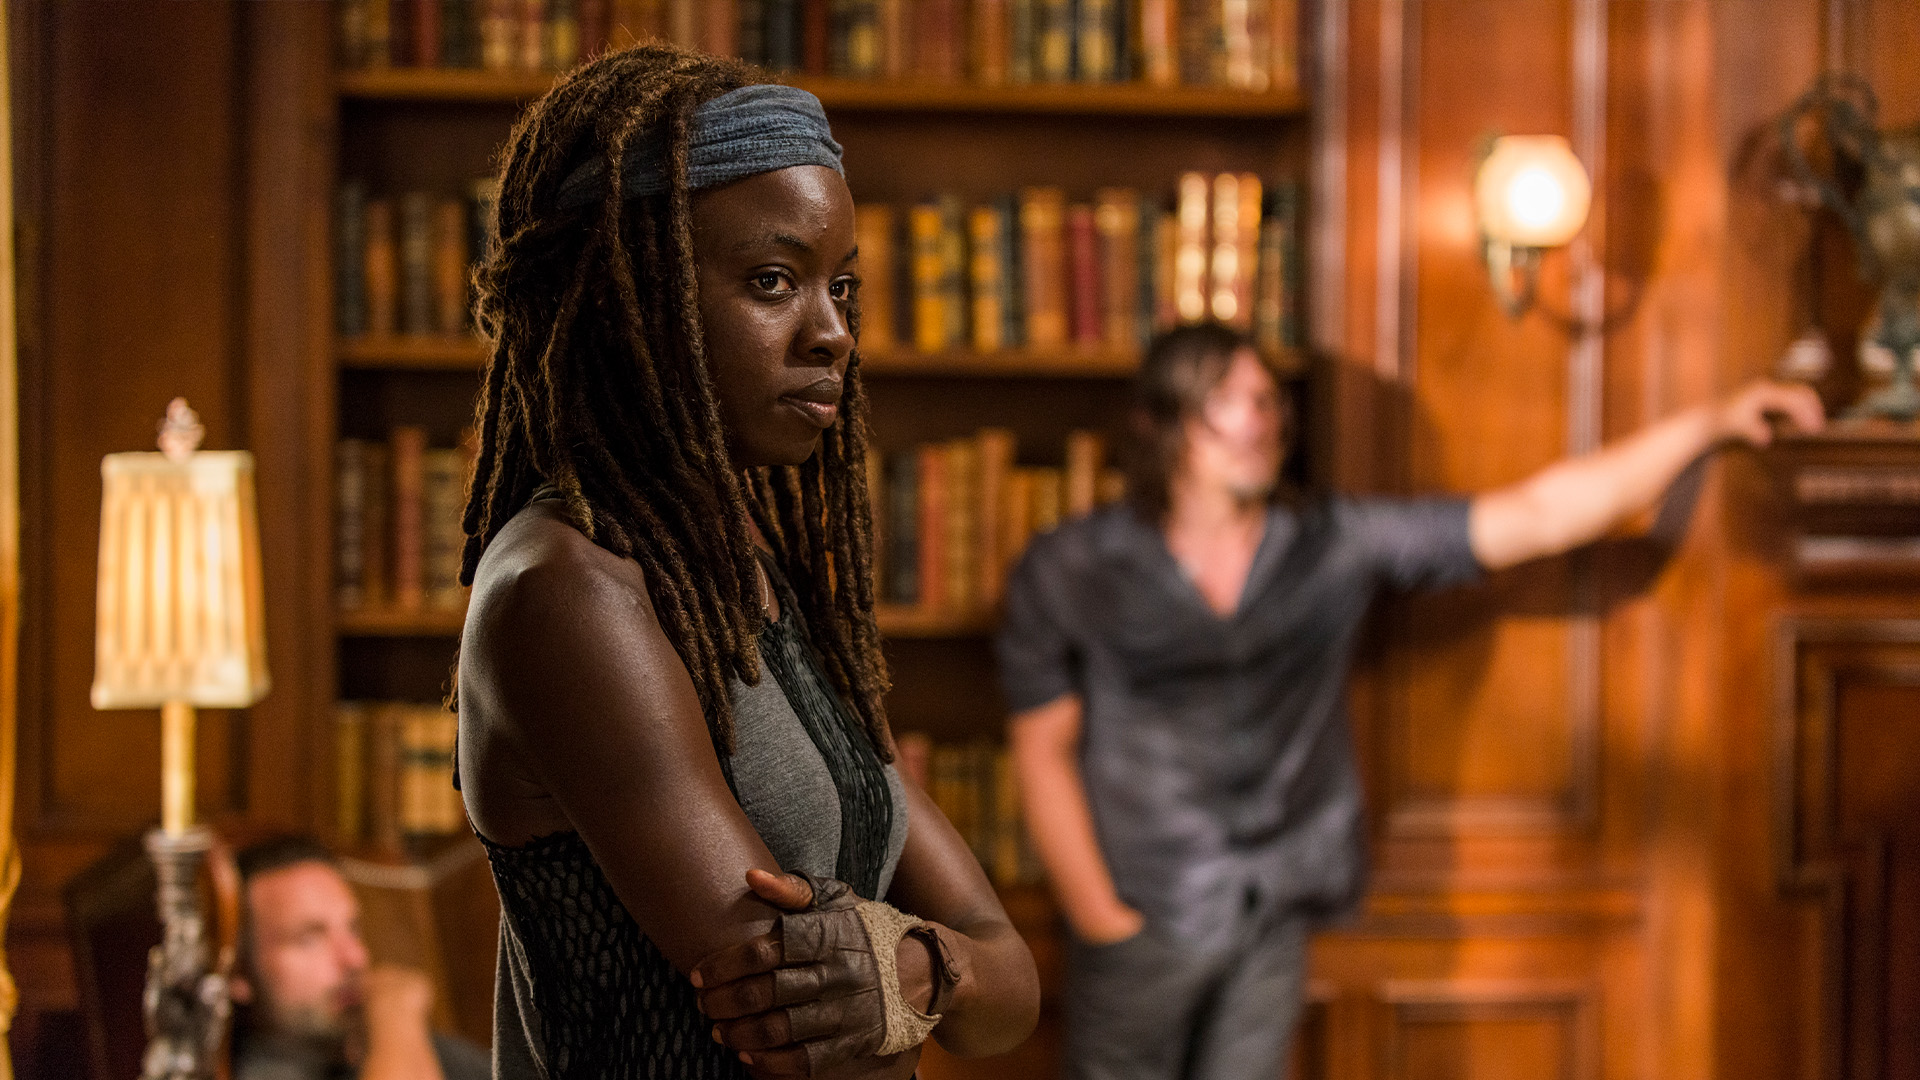 Rock in the Road: Best of Michonne Edition, Relive Michonne's best moments in this iconic episode from Season 7., Season 1066703, Episode 4